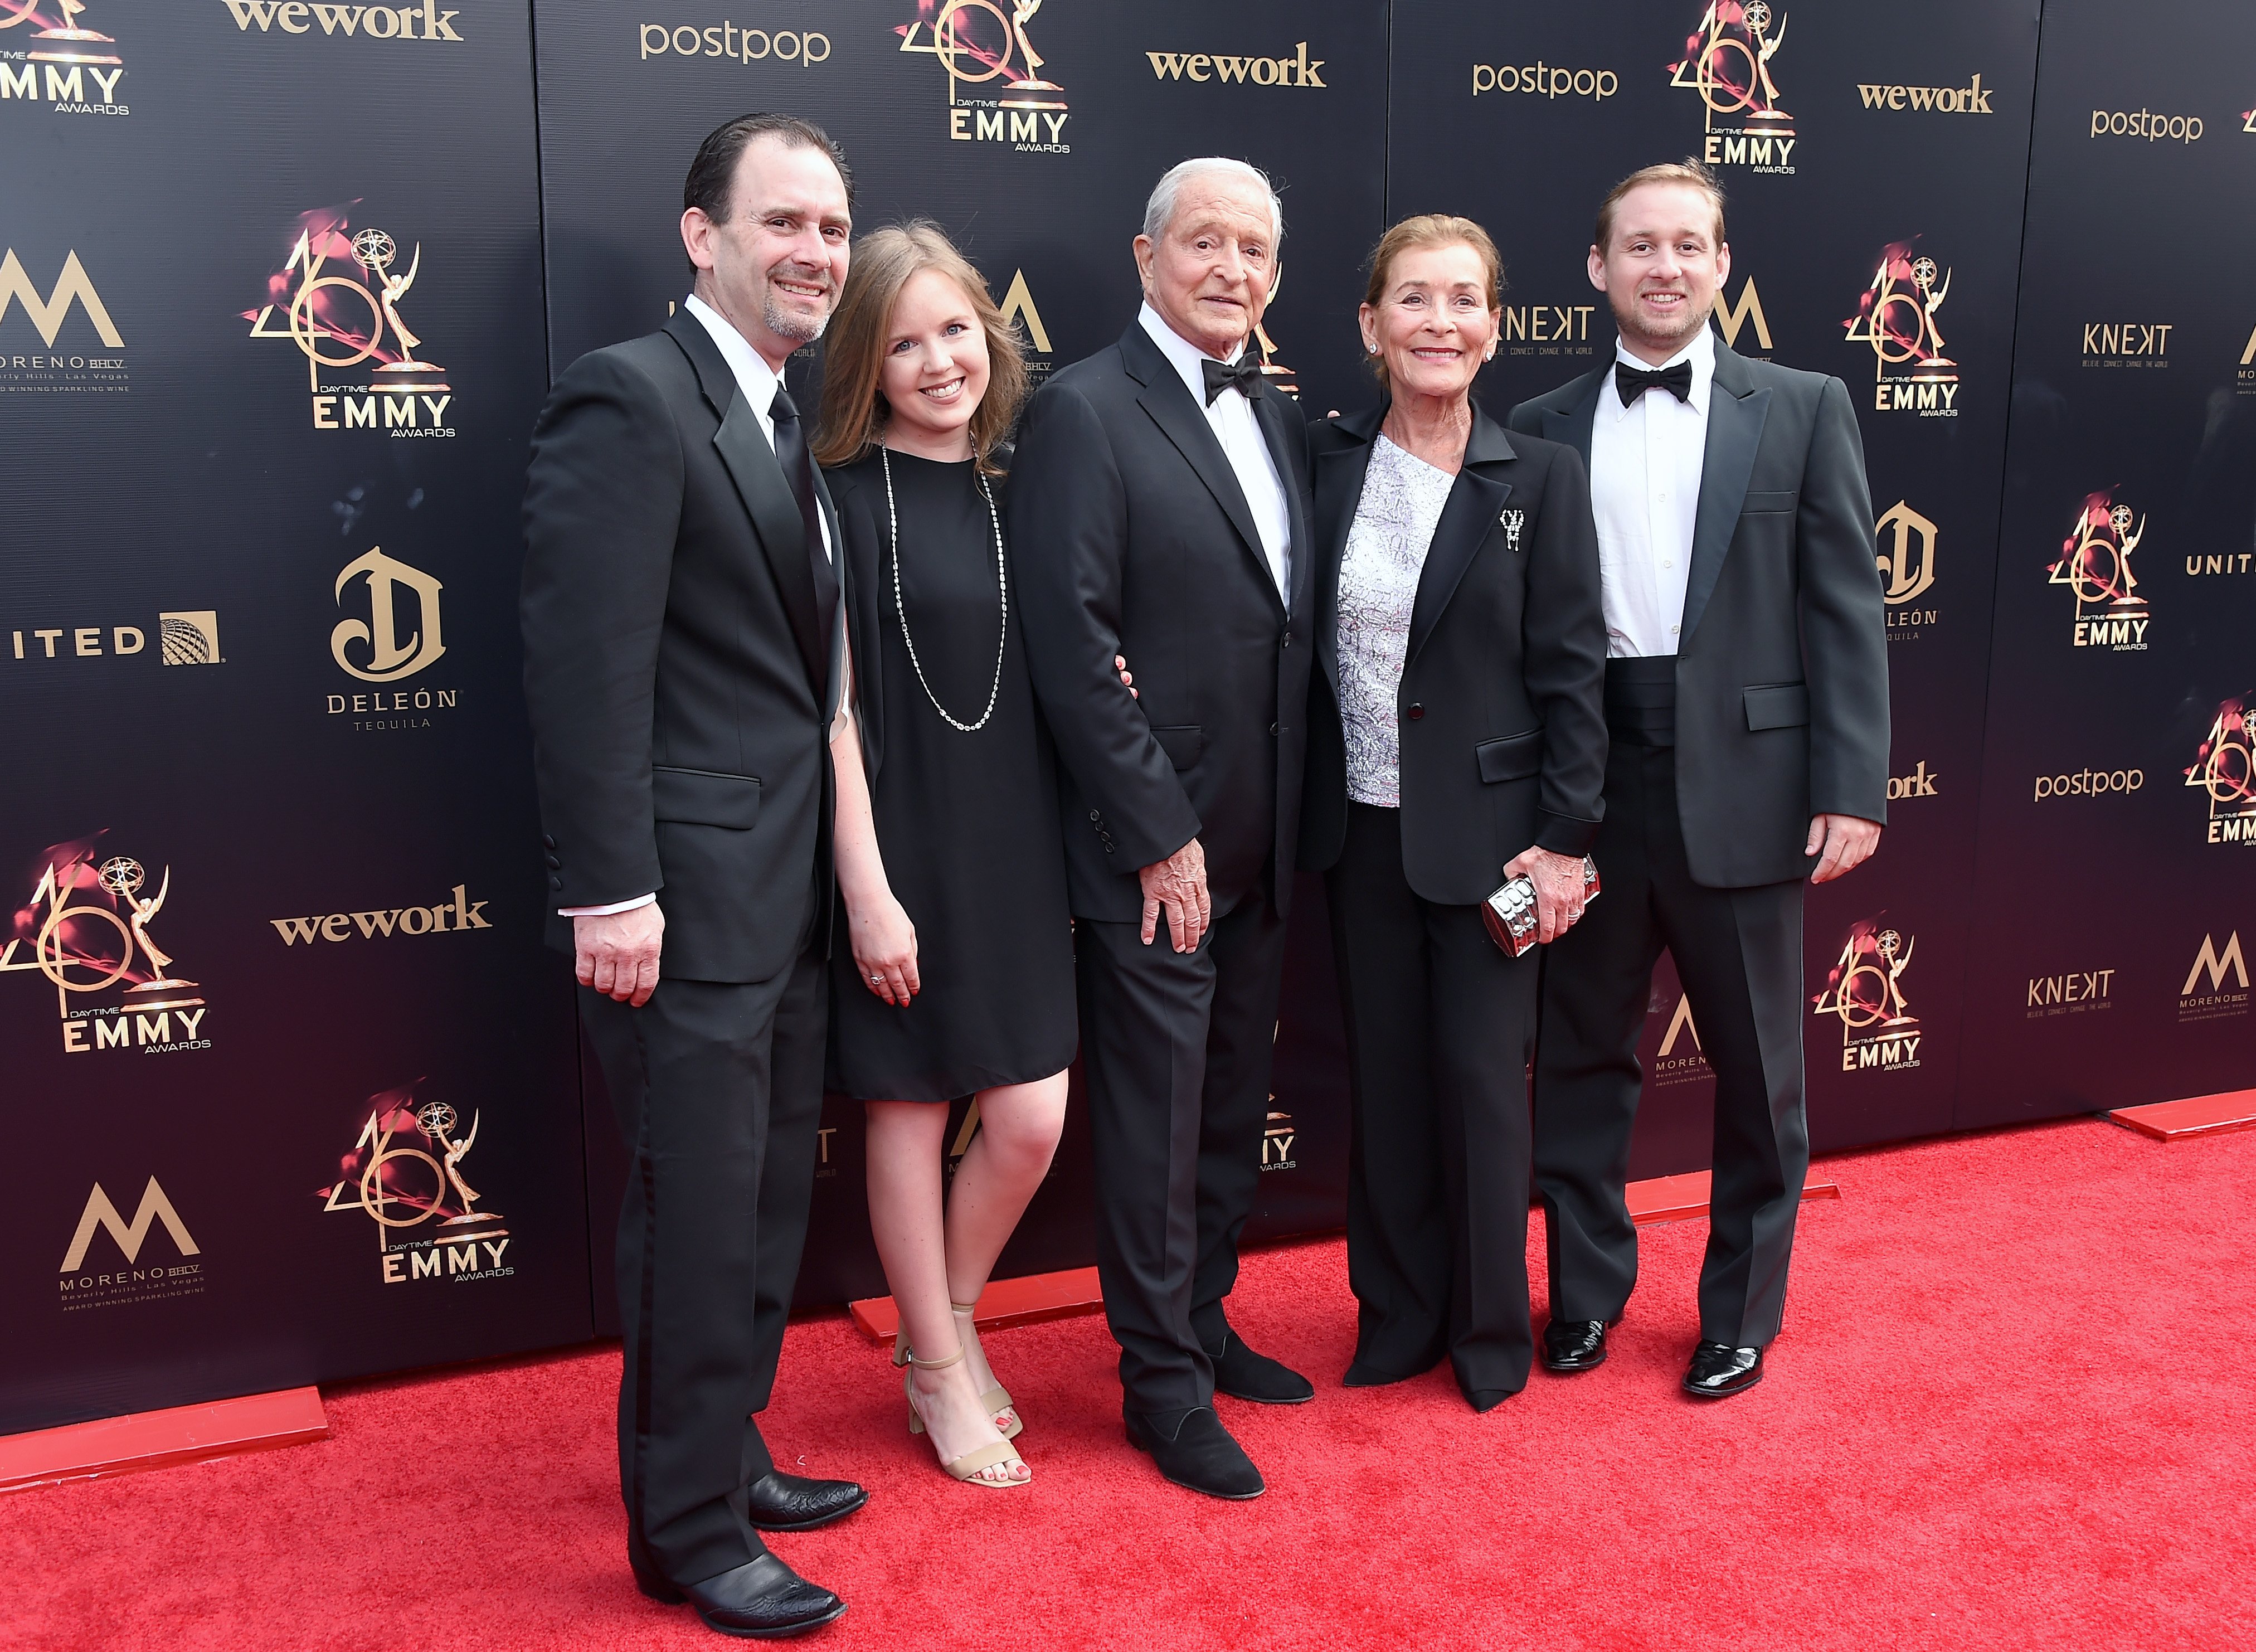 Judge Judy Sheindlin and family at the 46th annual Daytime Emmy Awards on May 5, 2019, in Pasadena, California | Source: Getty Images